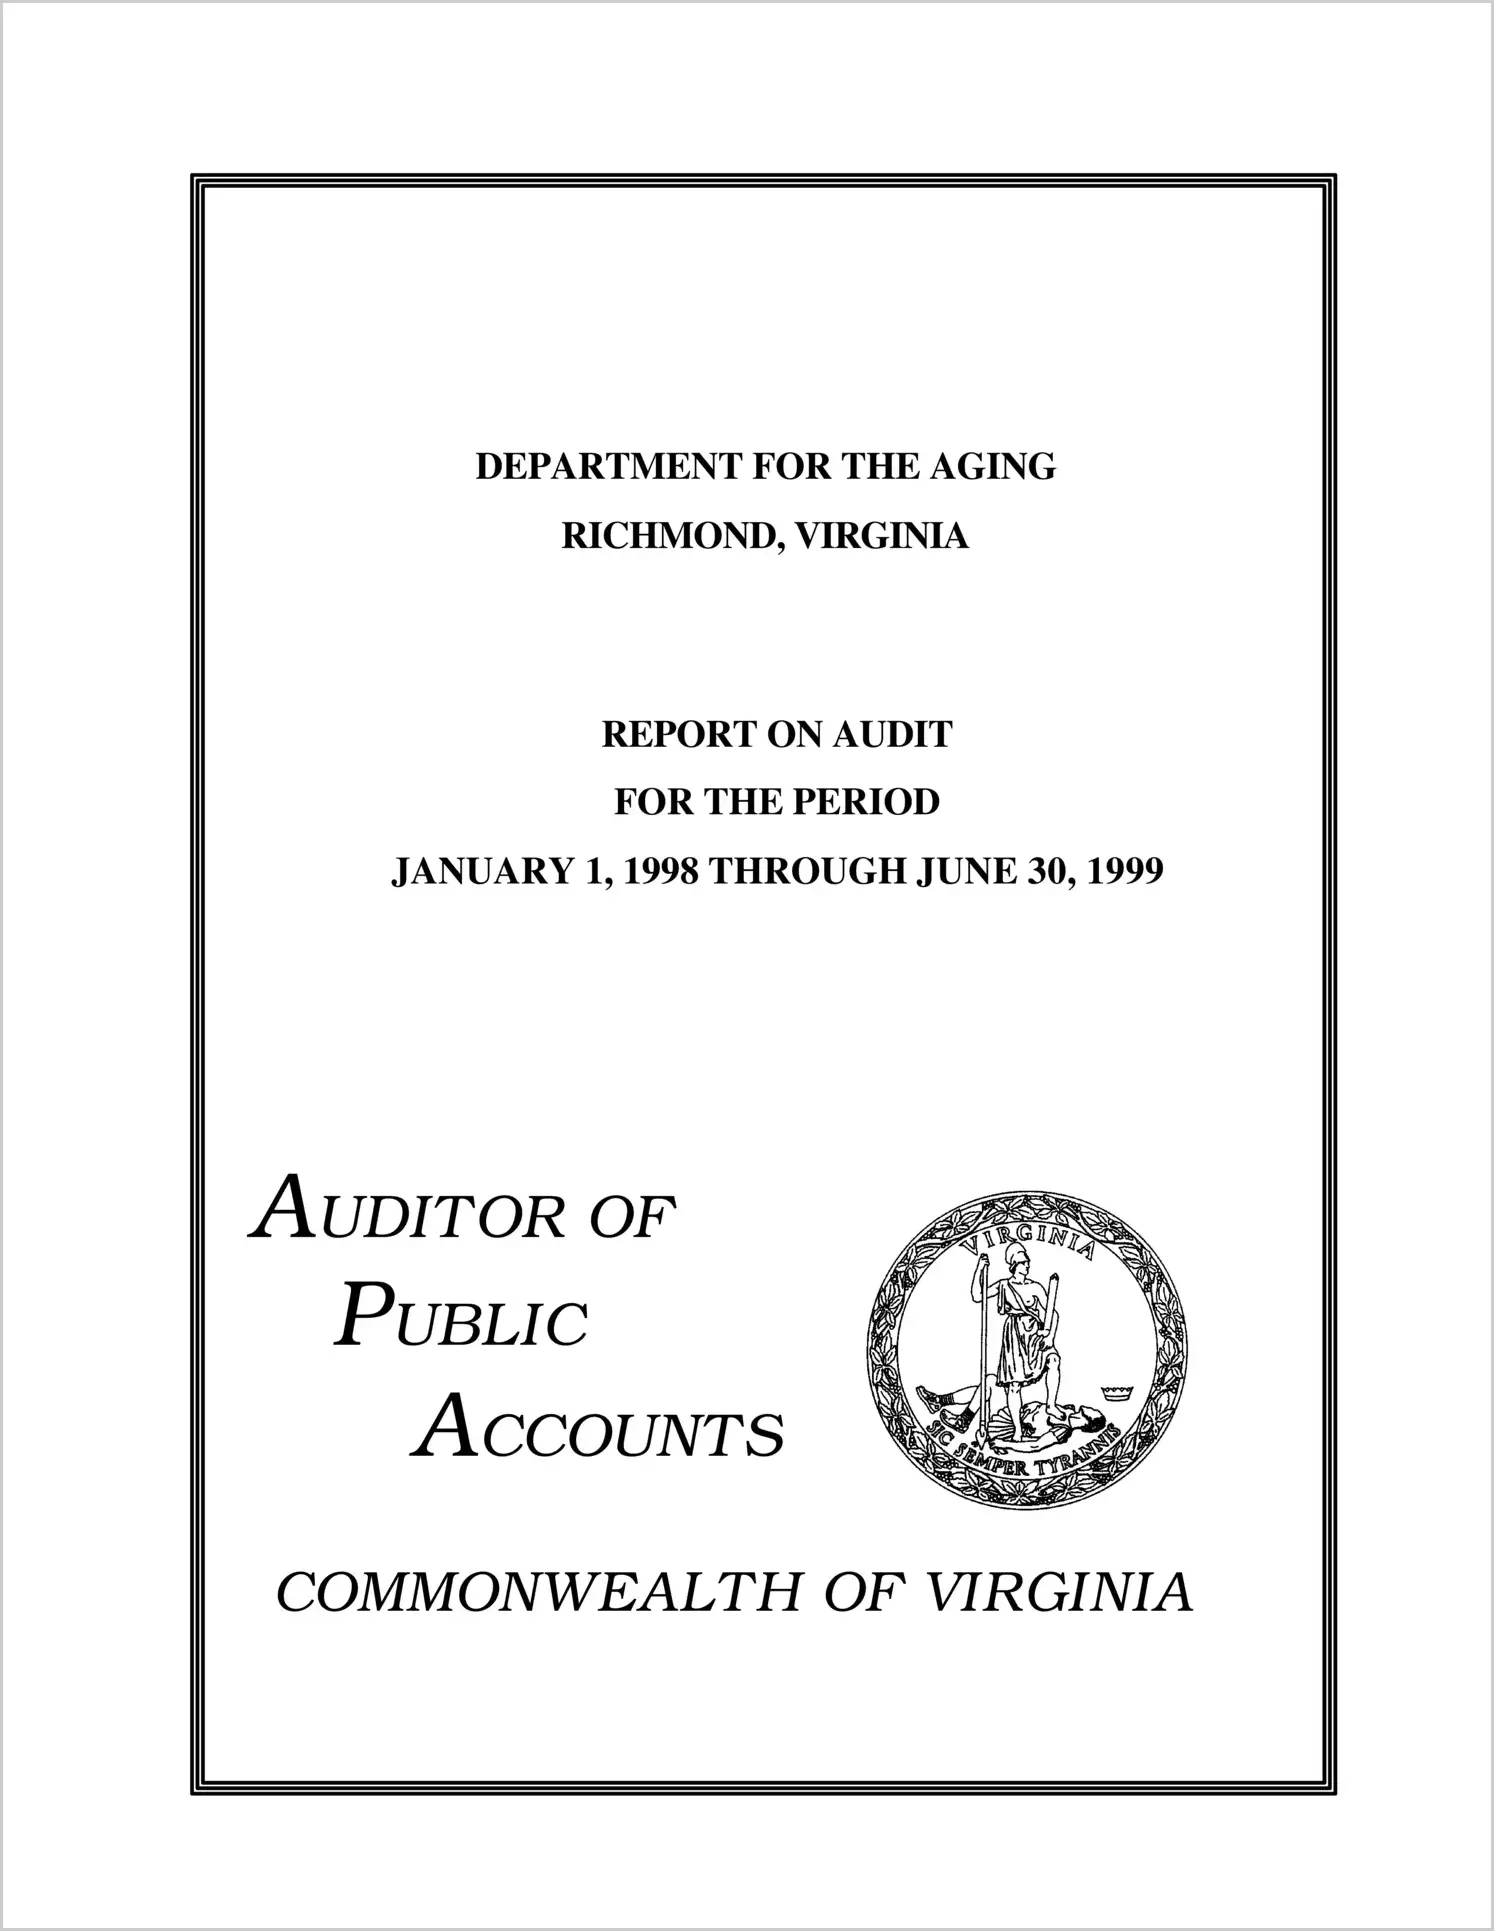 Department for the Aging for the period January 1, 1998 through June 30, 1999